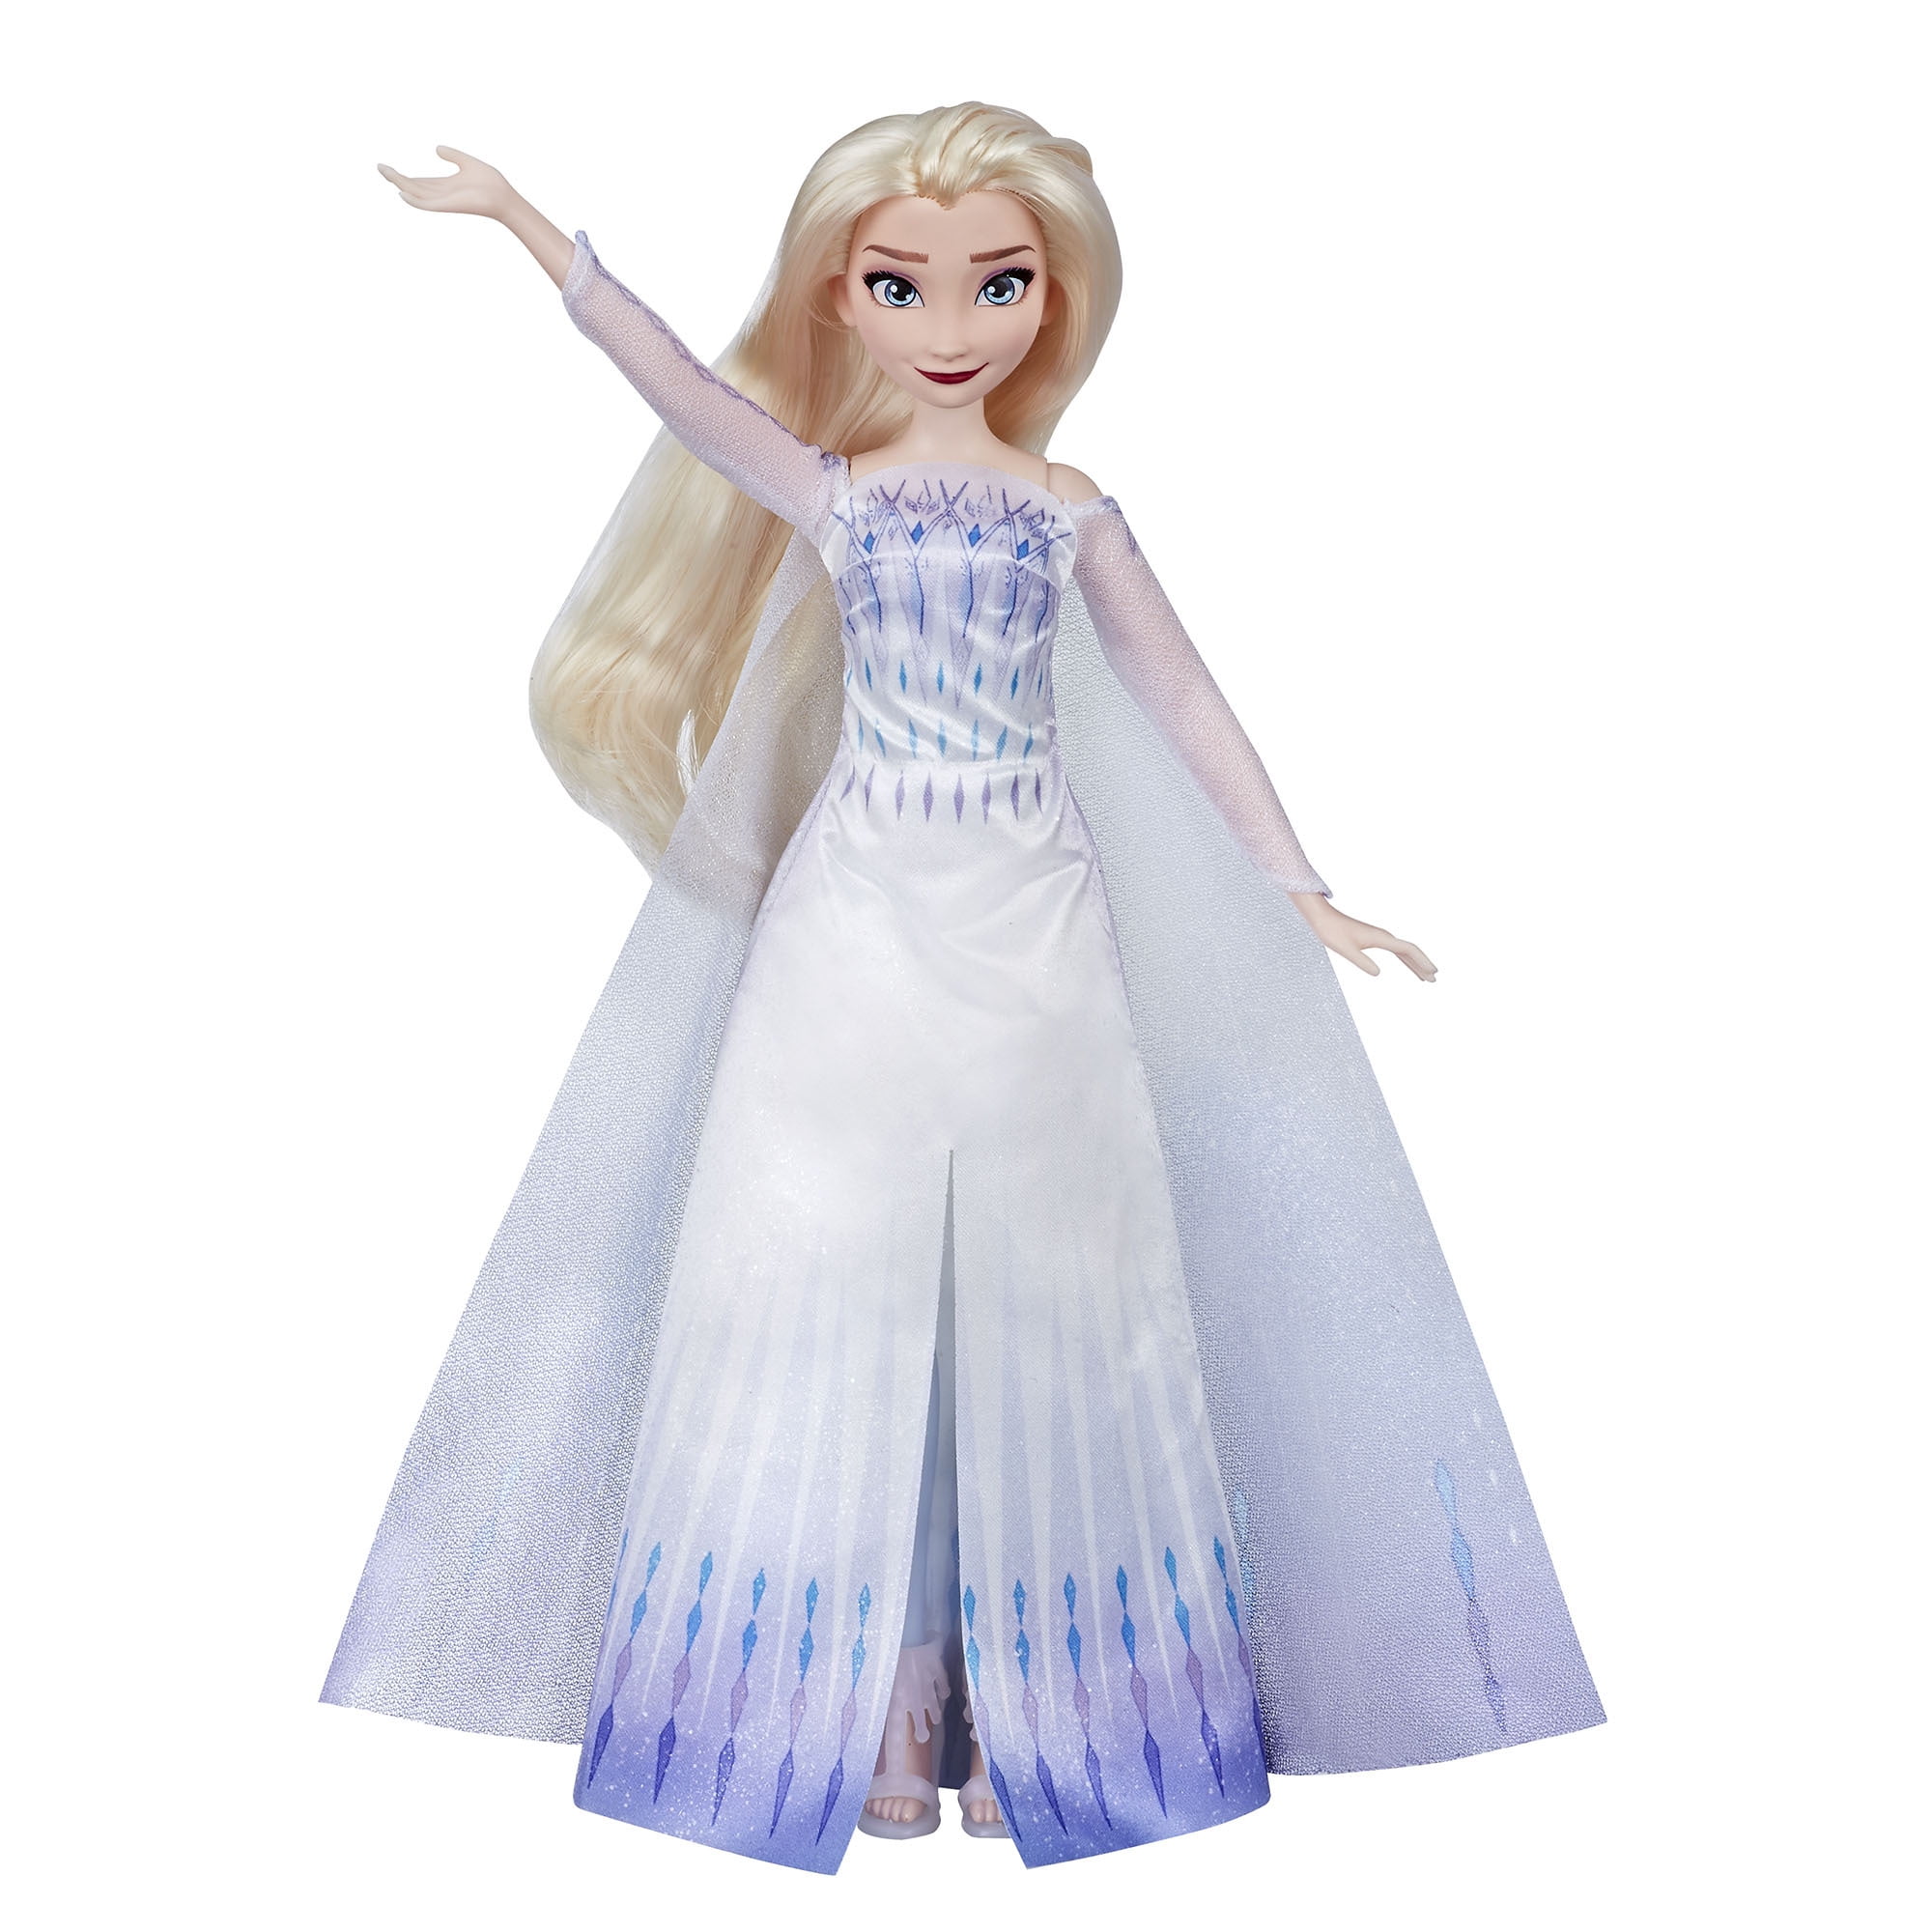 Disney Frozen Elsa Fashion Doll With Long Blonde Hair and Blue Outfit Inspired 2 